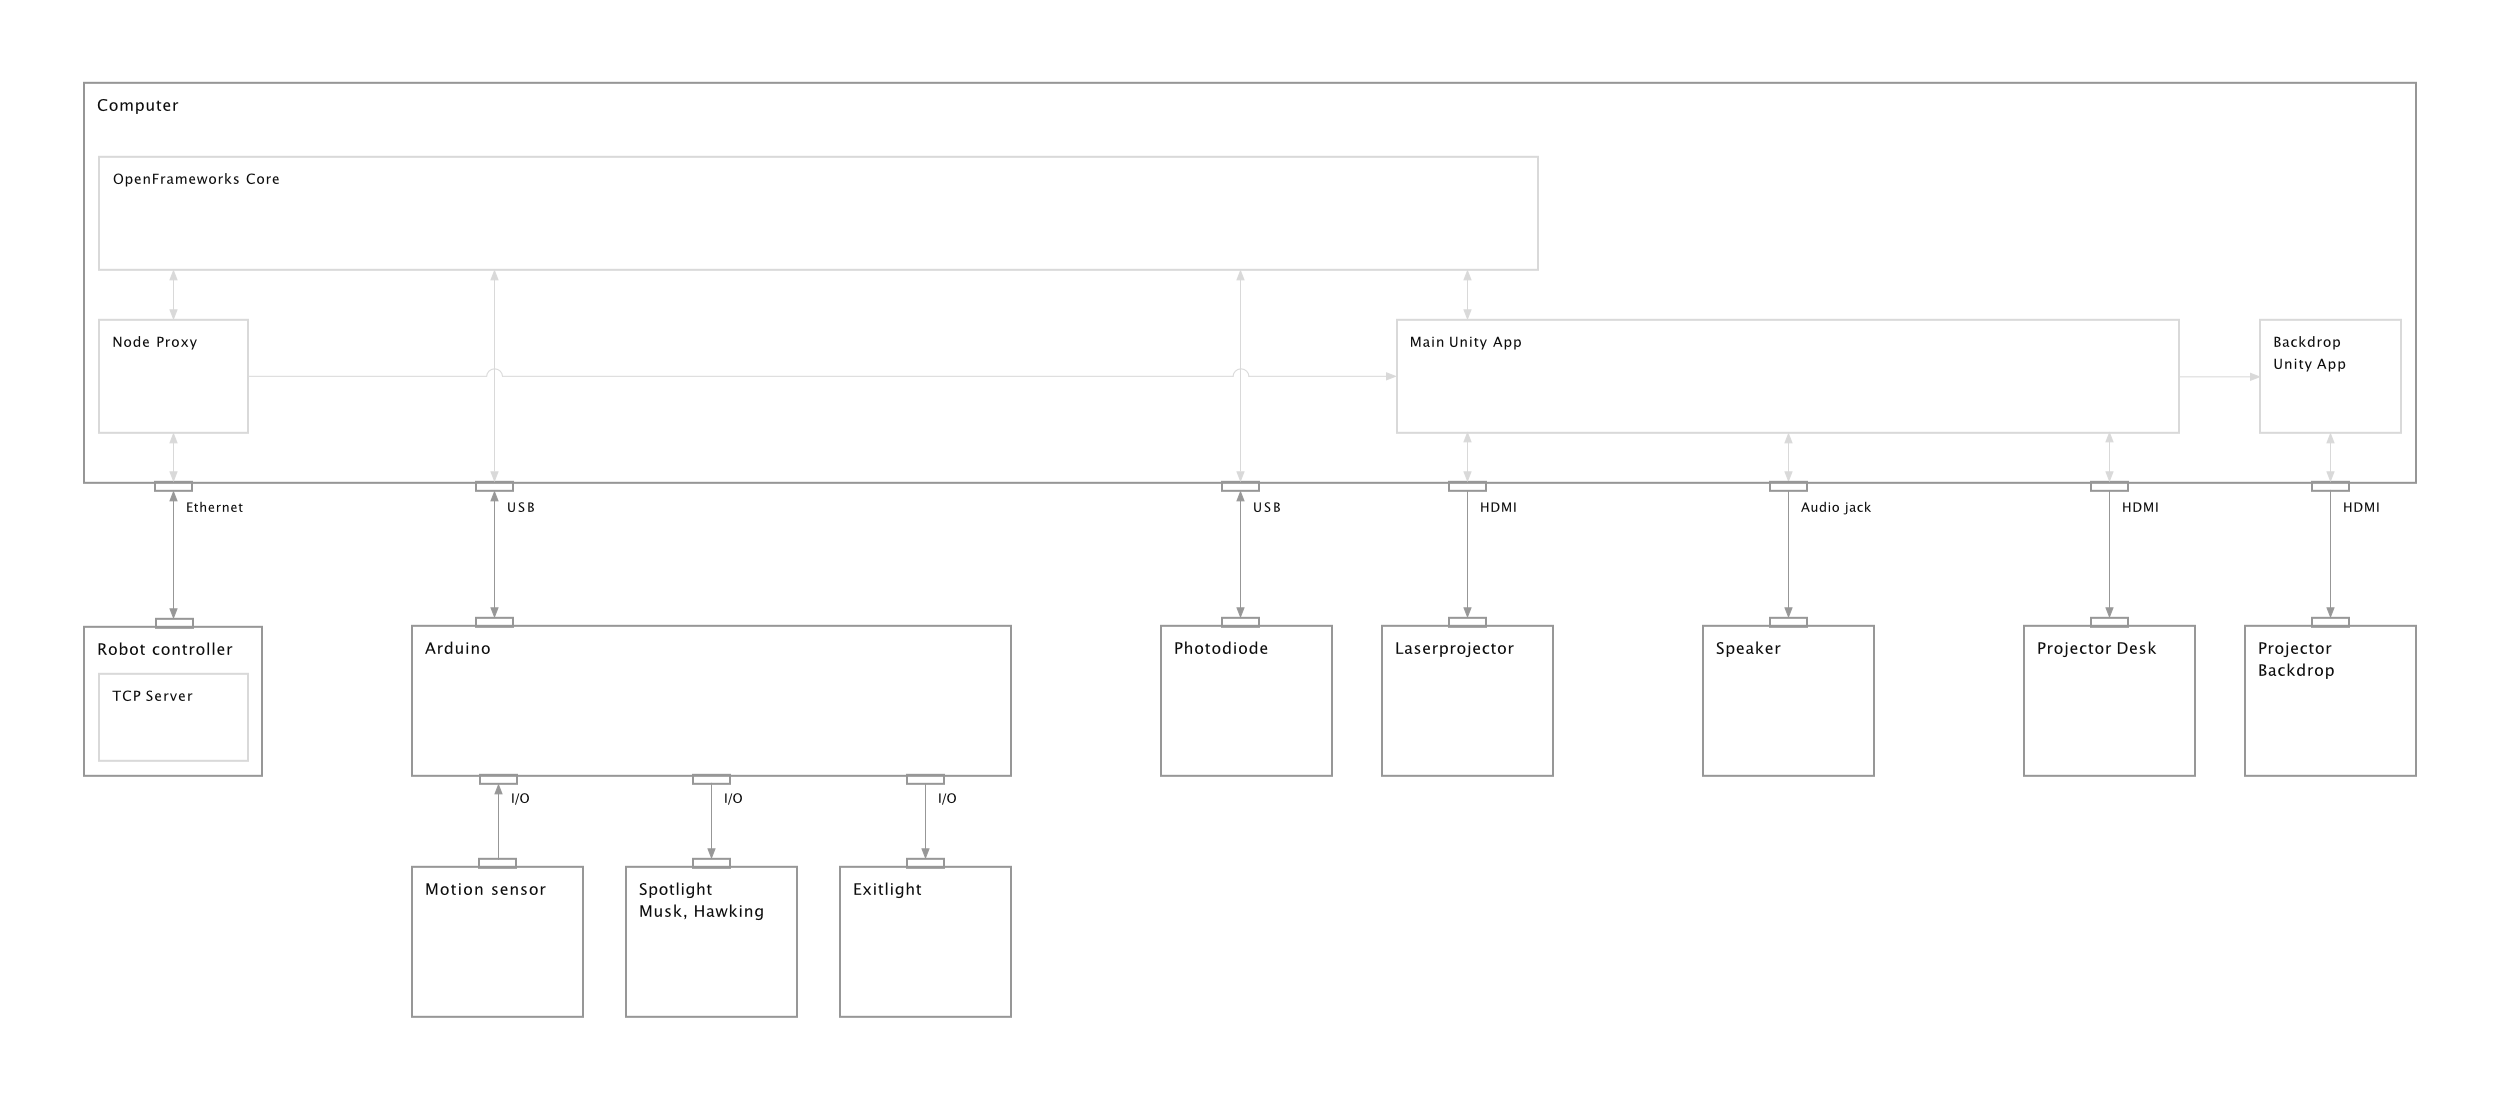 Graph illustrating the connections between various hardware and software components.